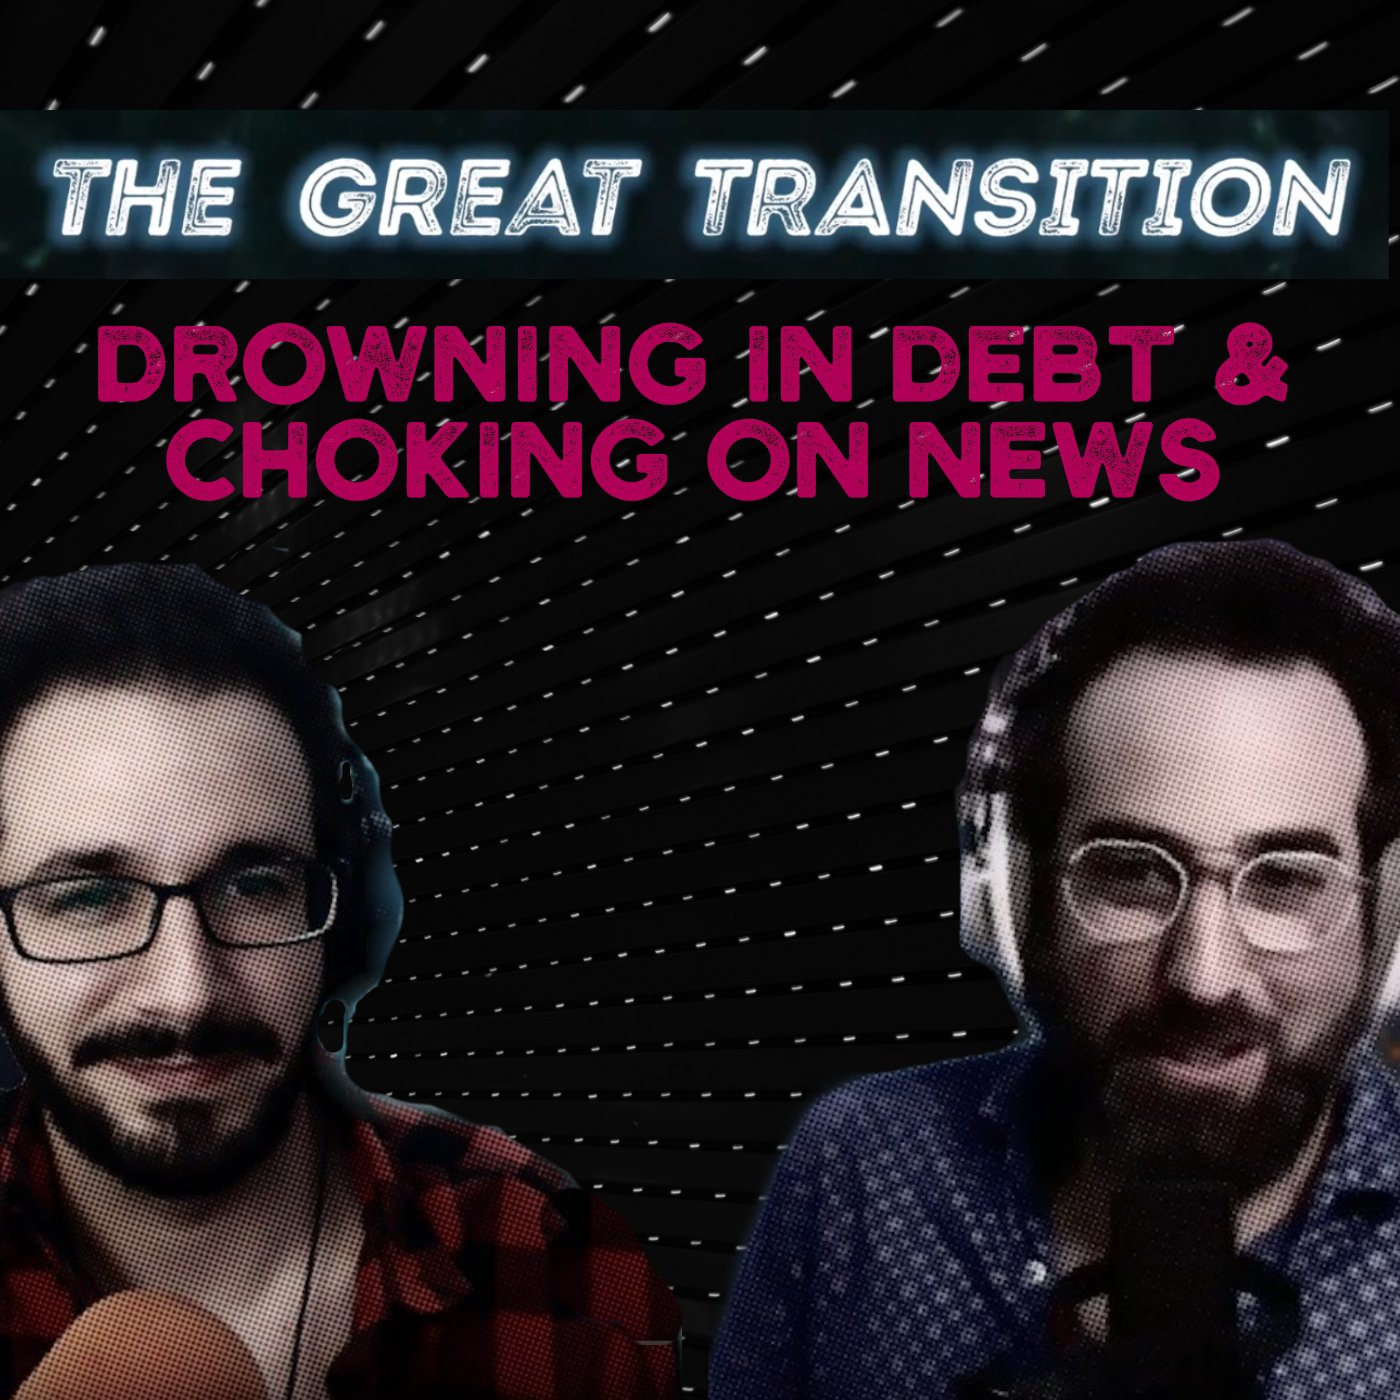 The Great Transition - Drowning in Debt & Choking on News